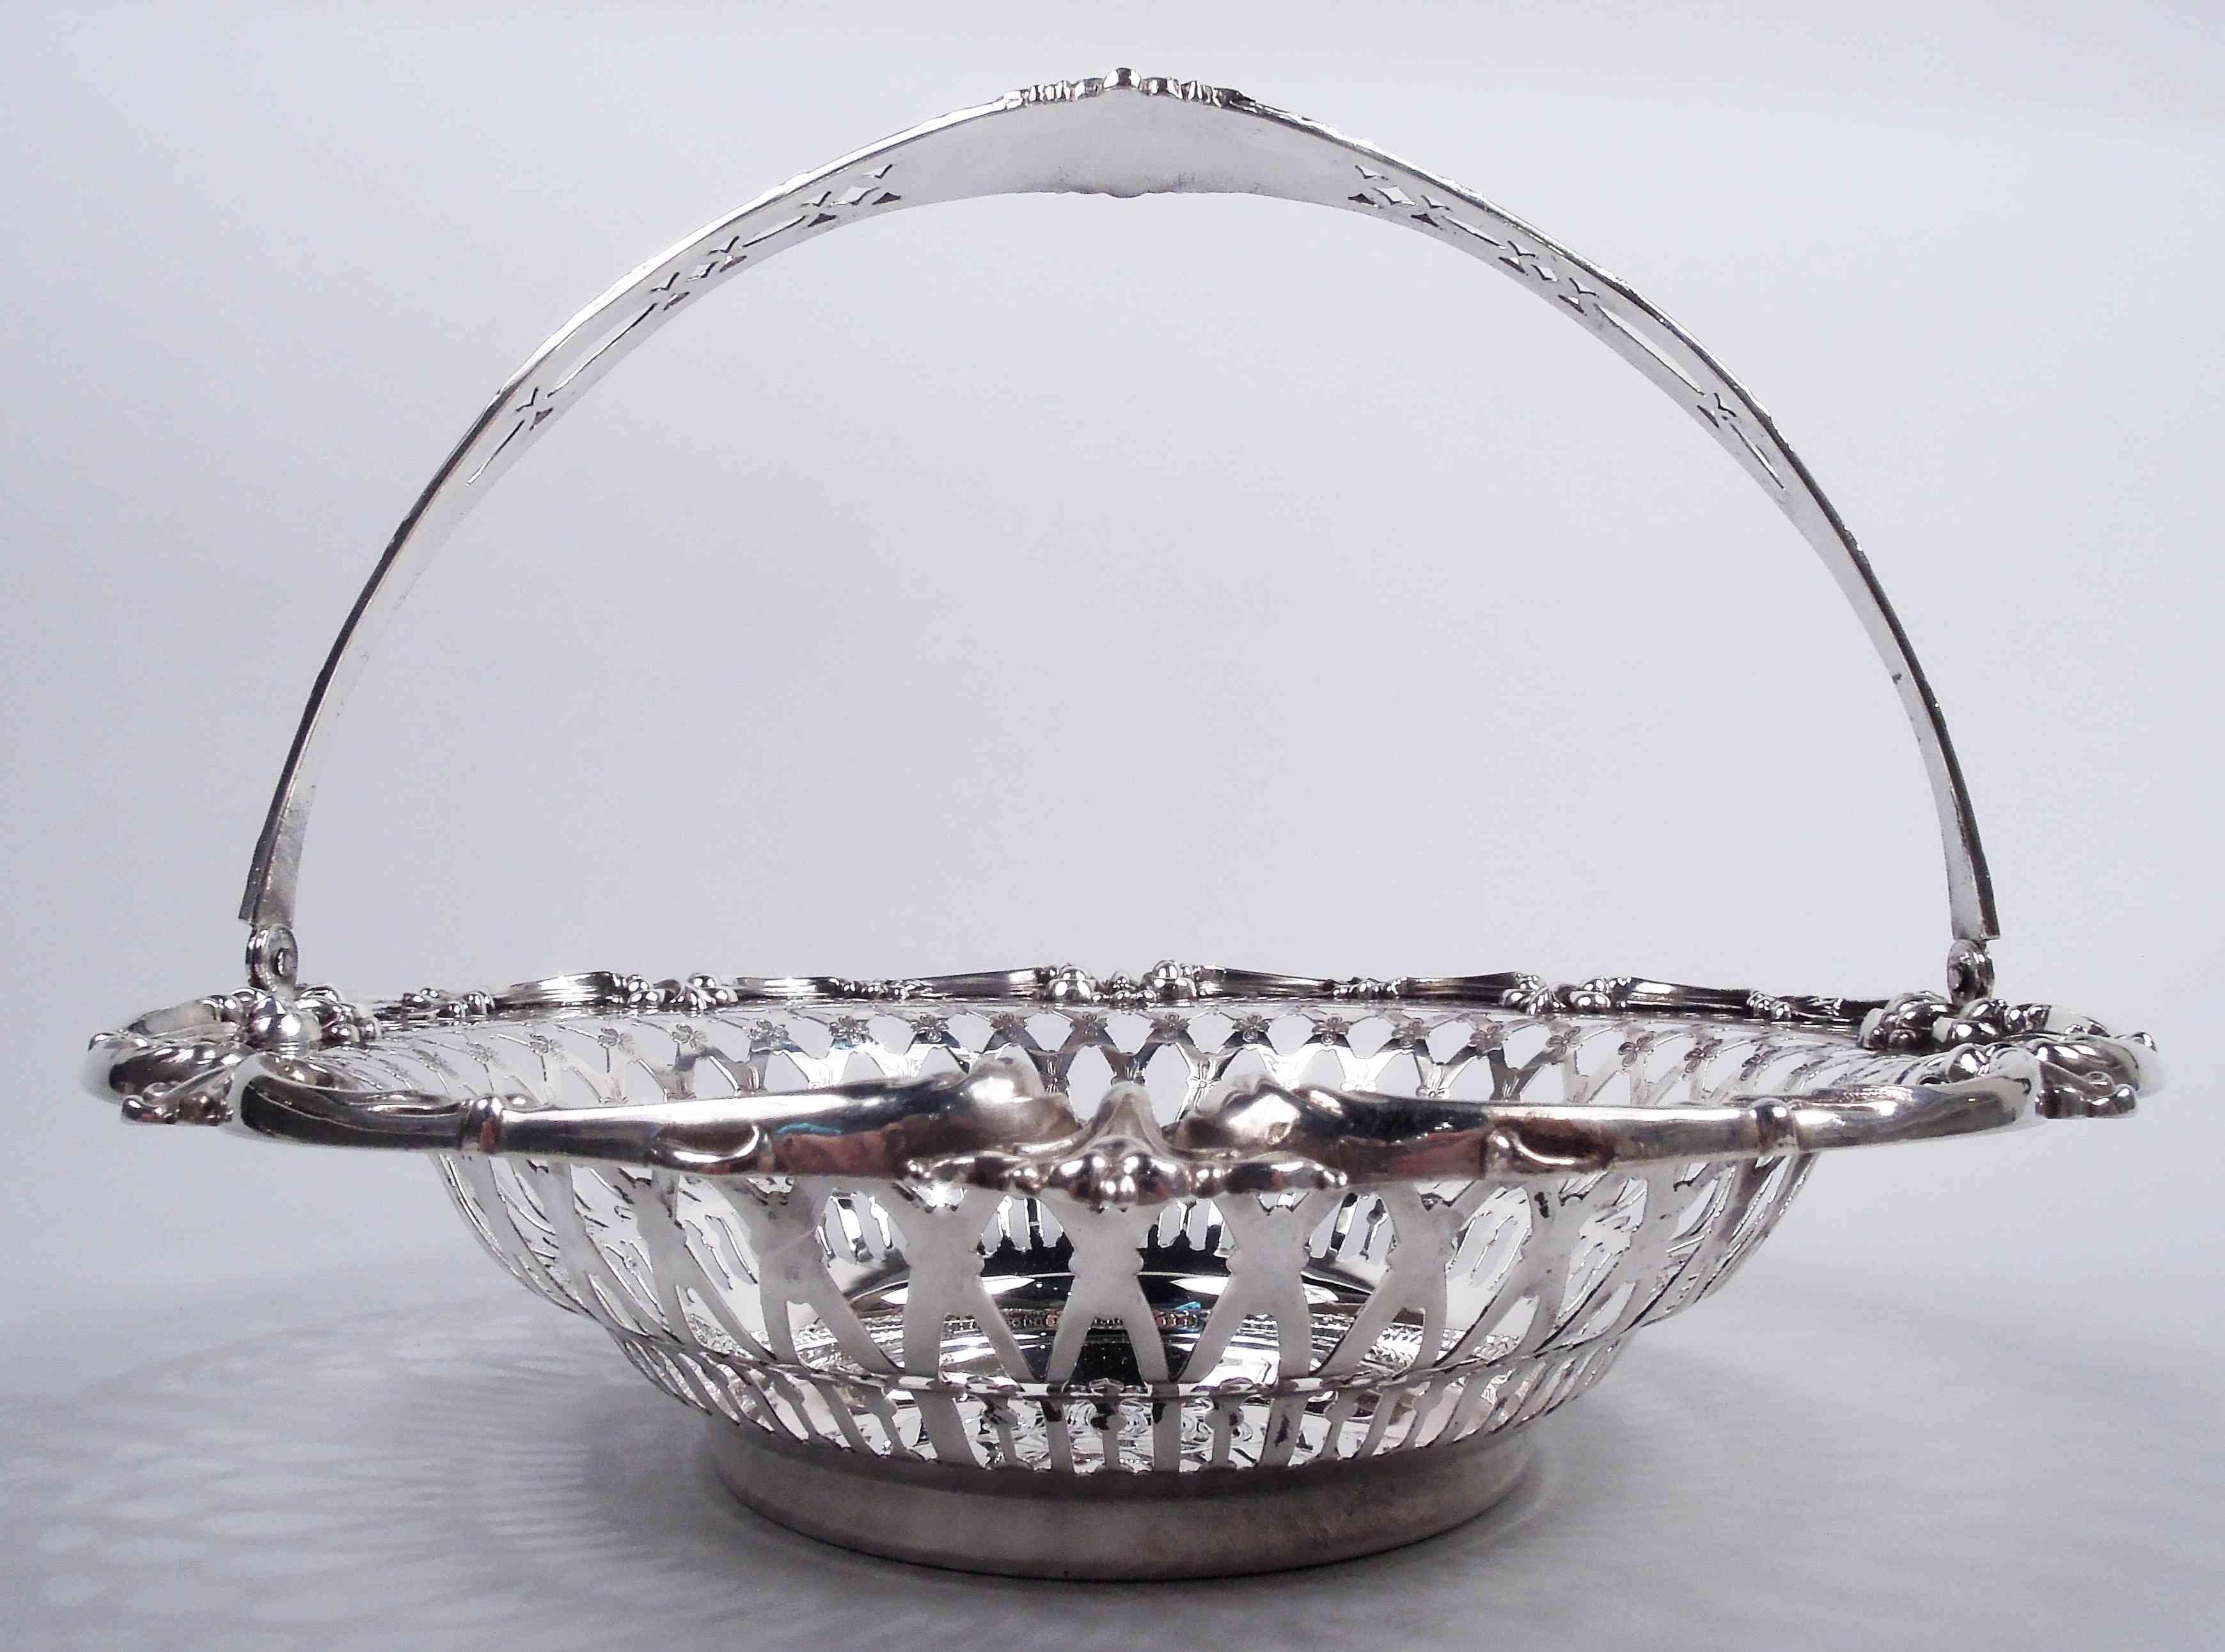 American Edwardian Classical sterling silver basket, ca 1910, Solid well engraved with interlaced script monogram. Sides and shoulder pierced with colonnade, arcade, diaper, and fleurs de lys. Rim has applied leafing scrolls interspersed with